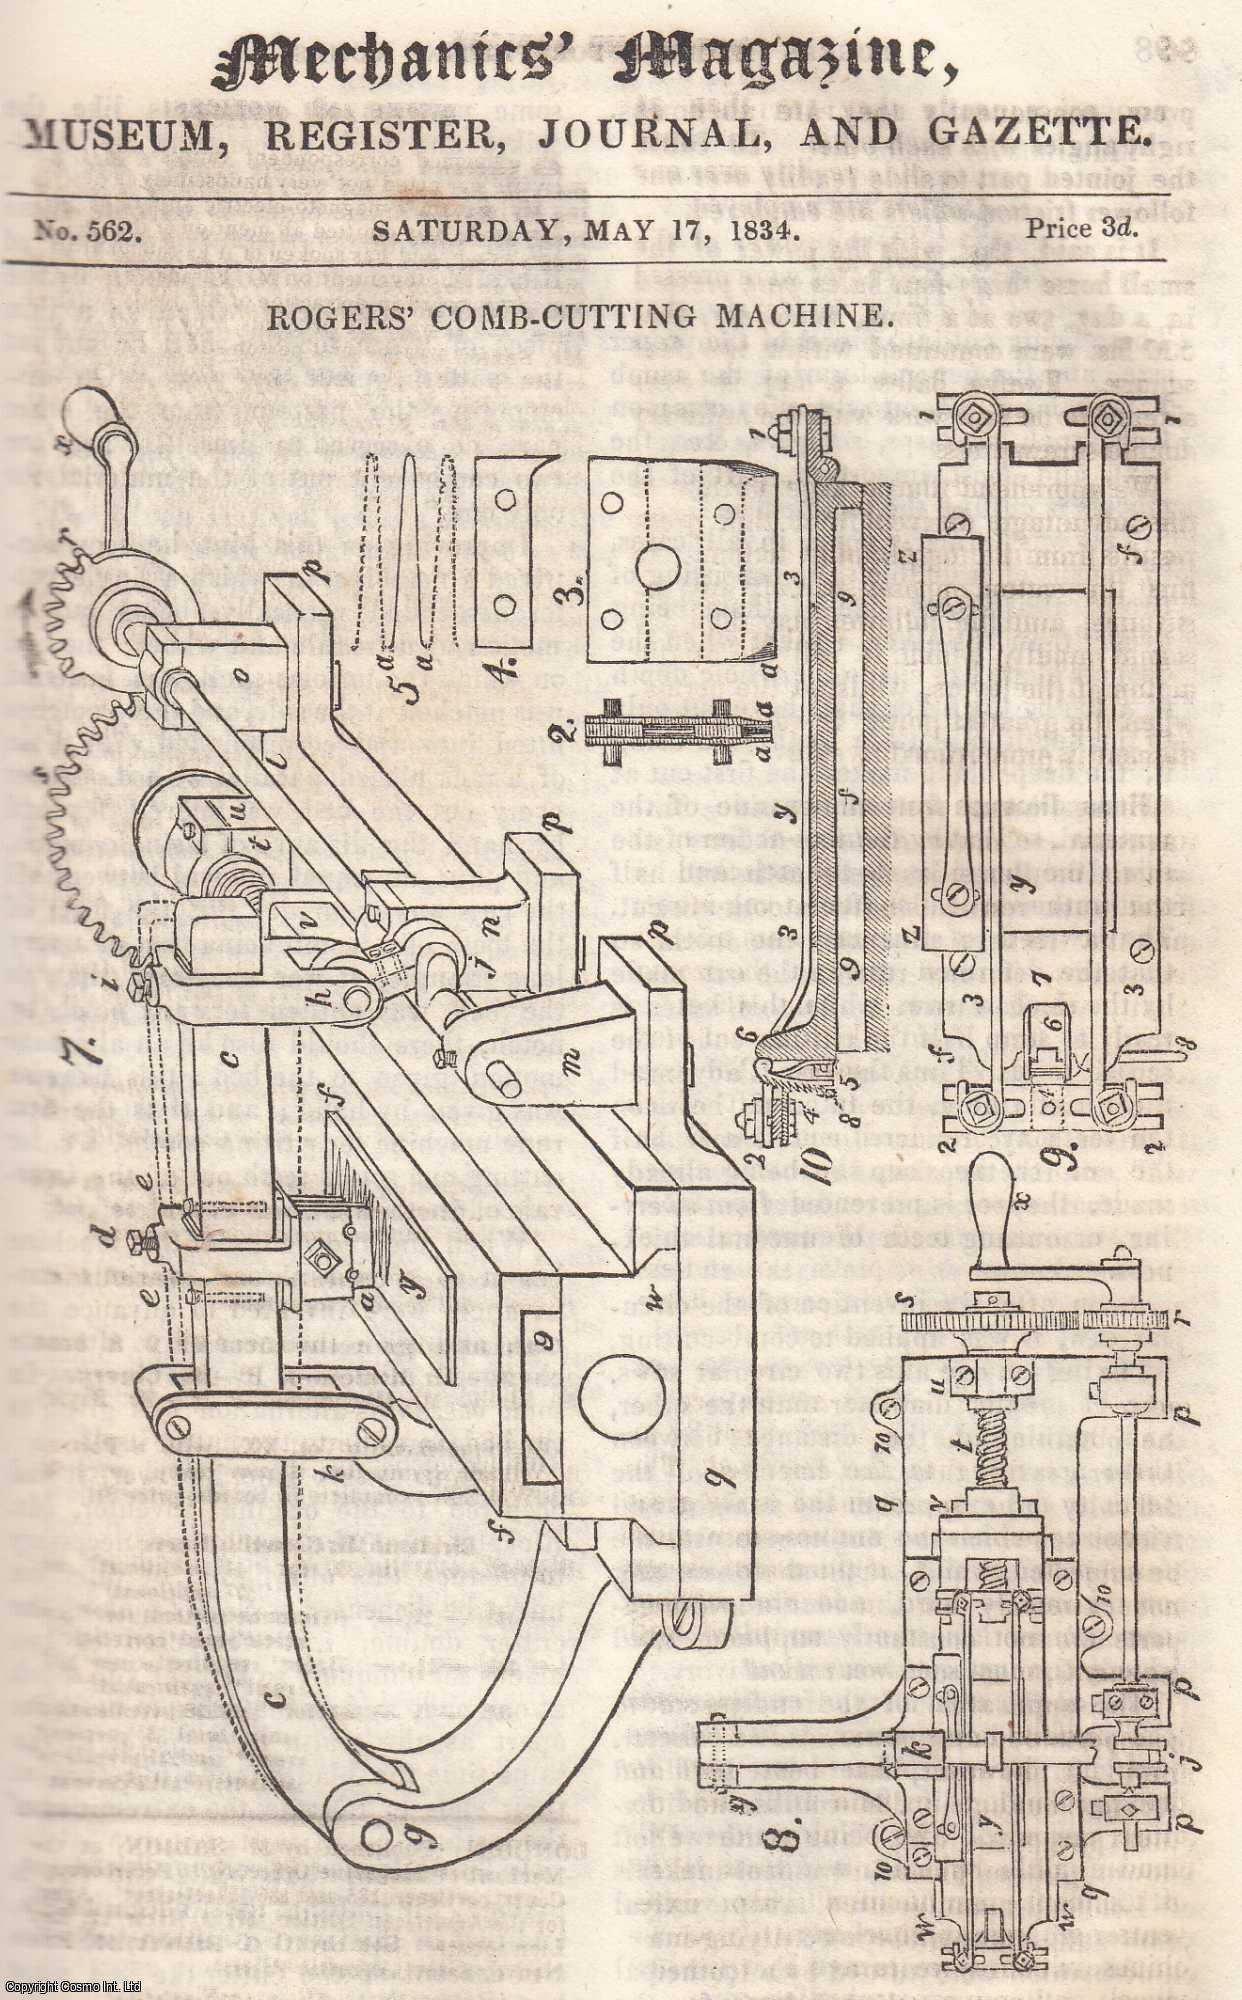 Mechanics Magazine - Rogers' Comb-Cutting Machine: Disadvantages of Purchasing Coals by Measure: Mechanics' Institution Lectures: Rotation of The Earth: Substitute For The Parallel Motion: Mr. Saxton's Locomotive-Pulley, etc. Mechanics Magazine, Museum, Register, Journal and Gazette. Issue No. 562. A complete rare weekly issue of the Mechanics' Magazine, 1834.